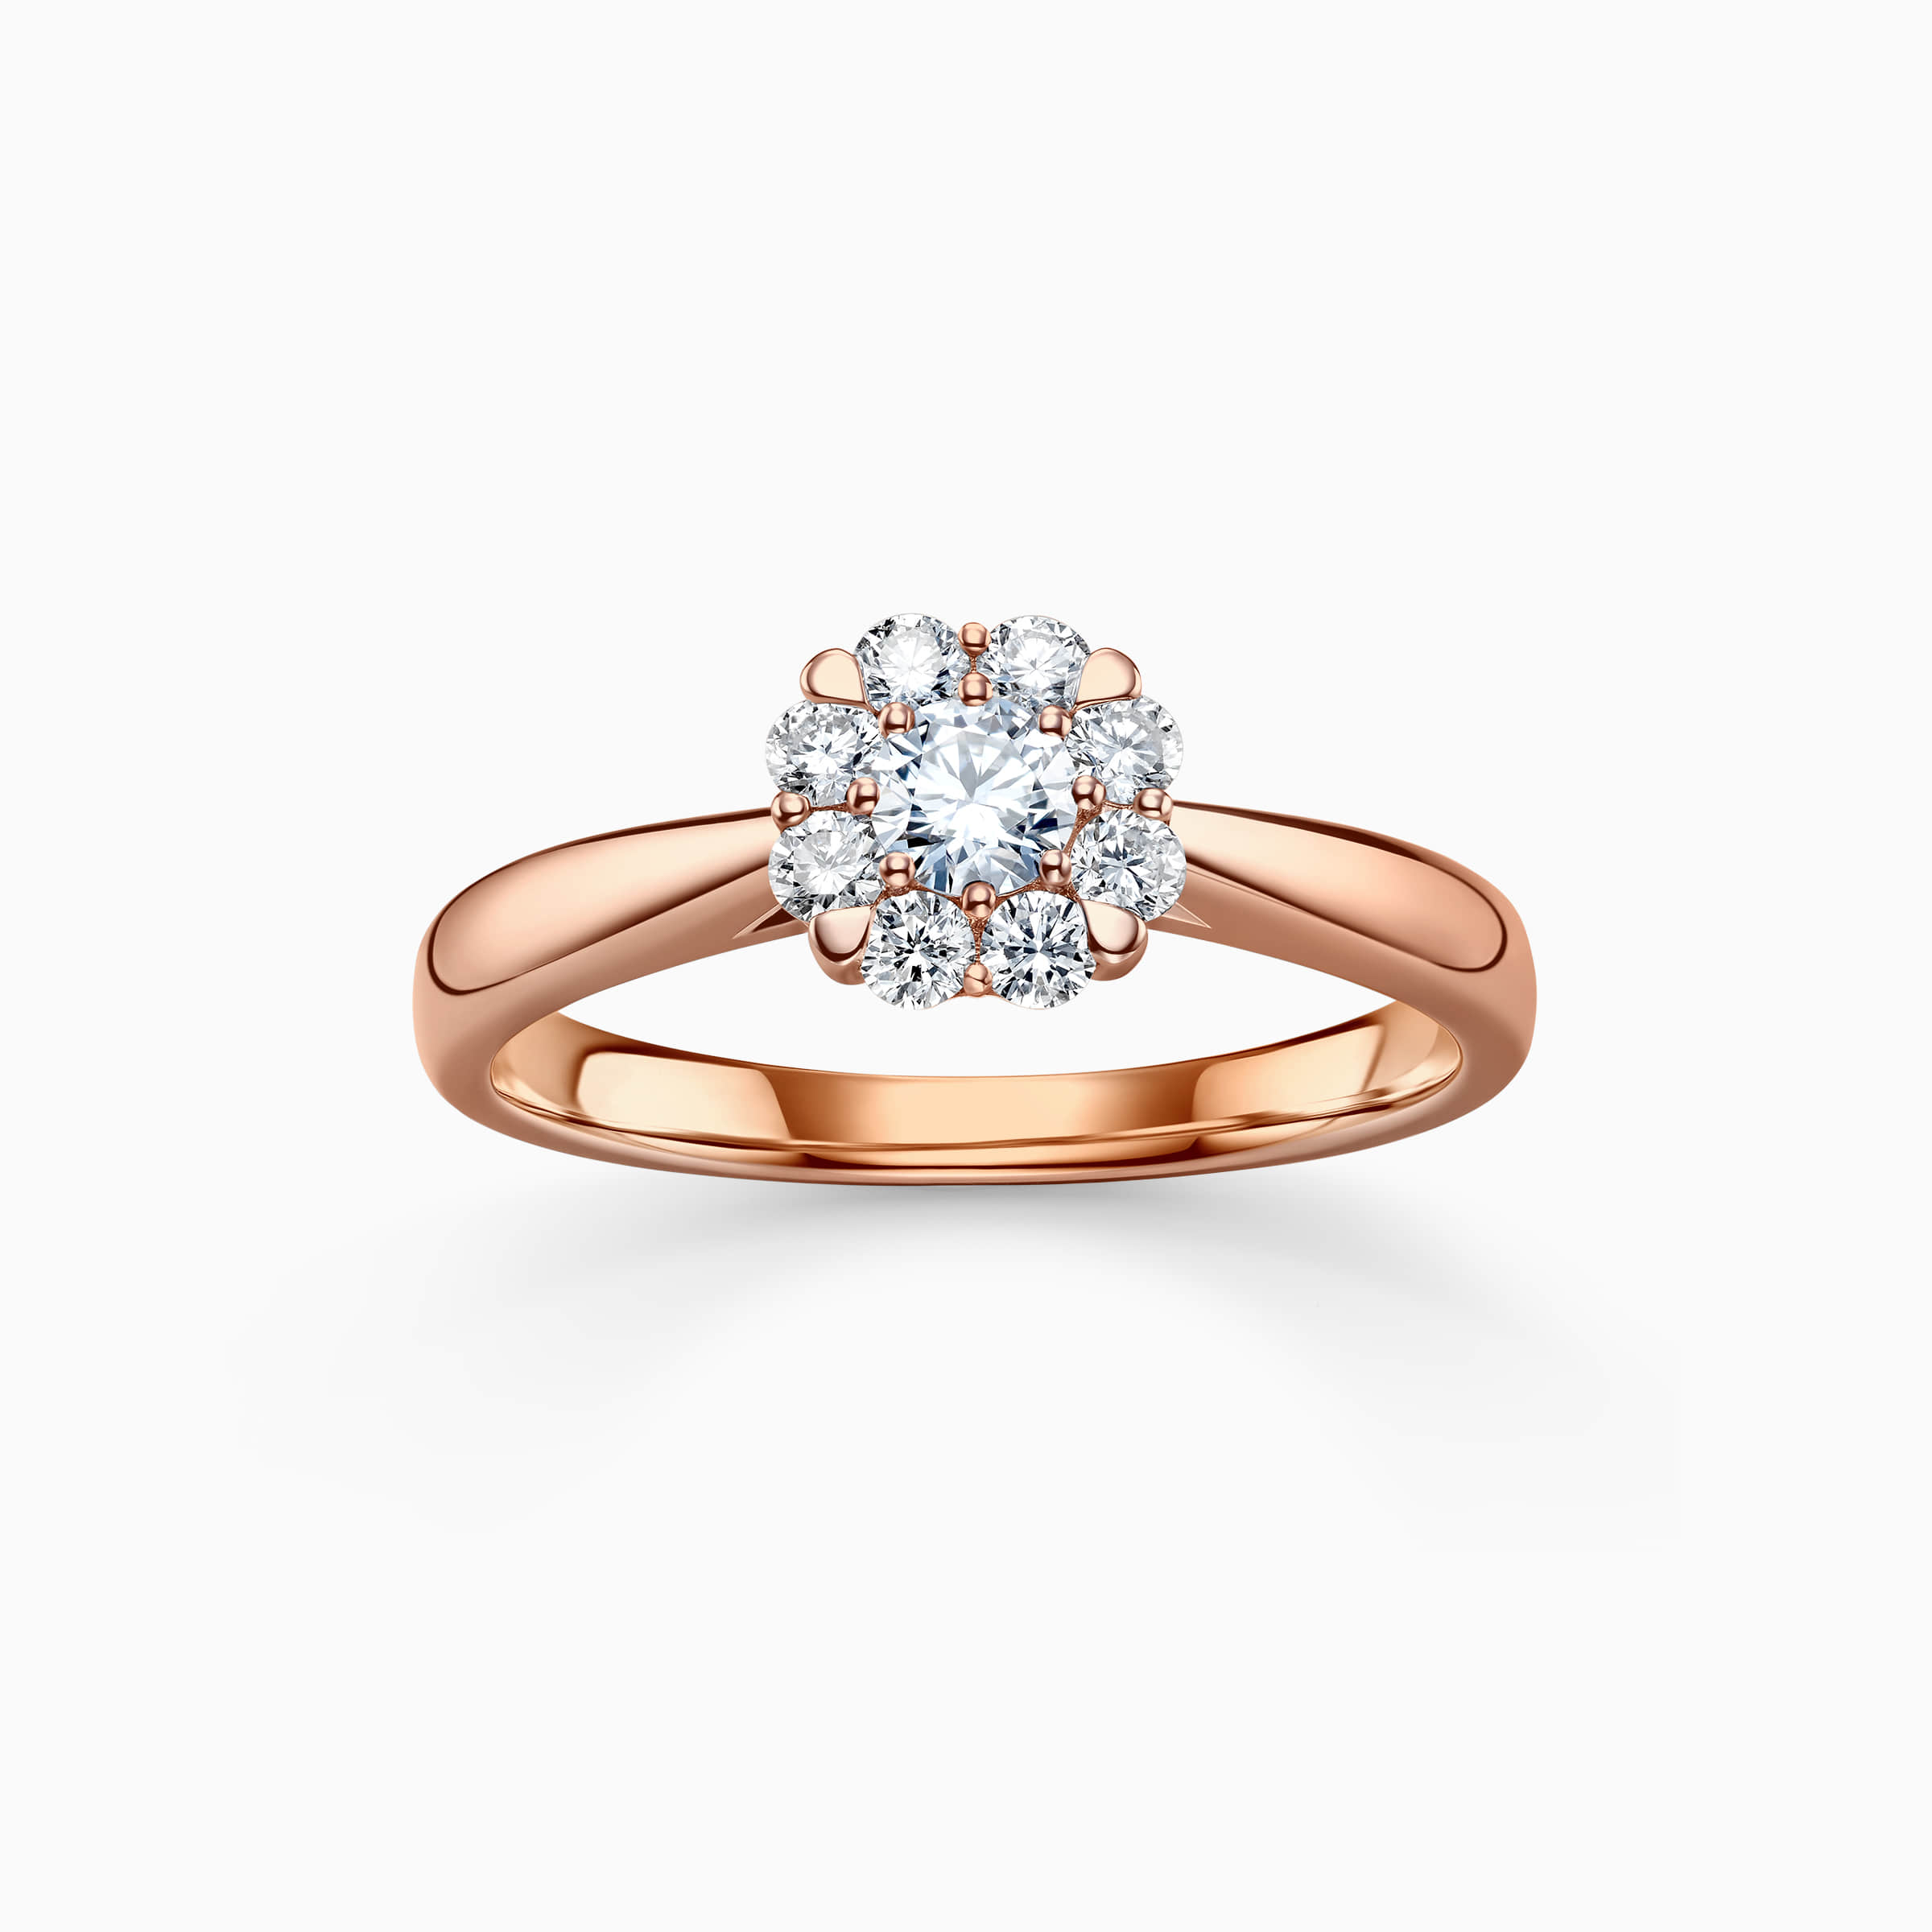 Darry Ring diamond halo promise ring rose gold